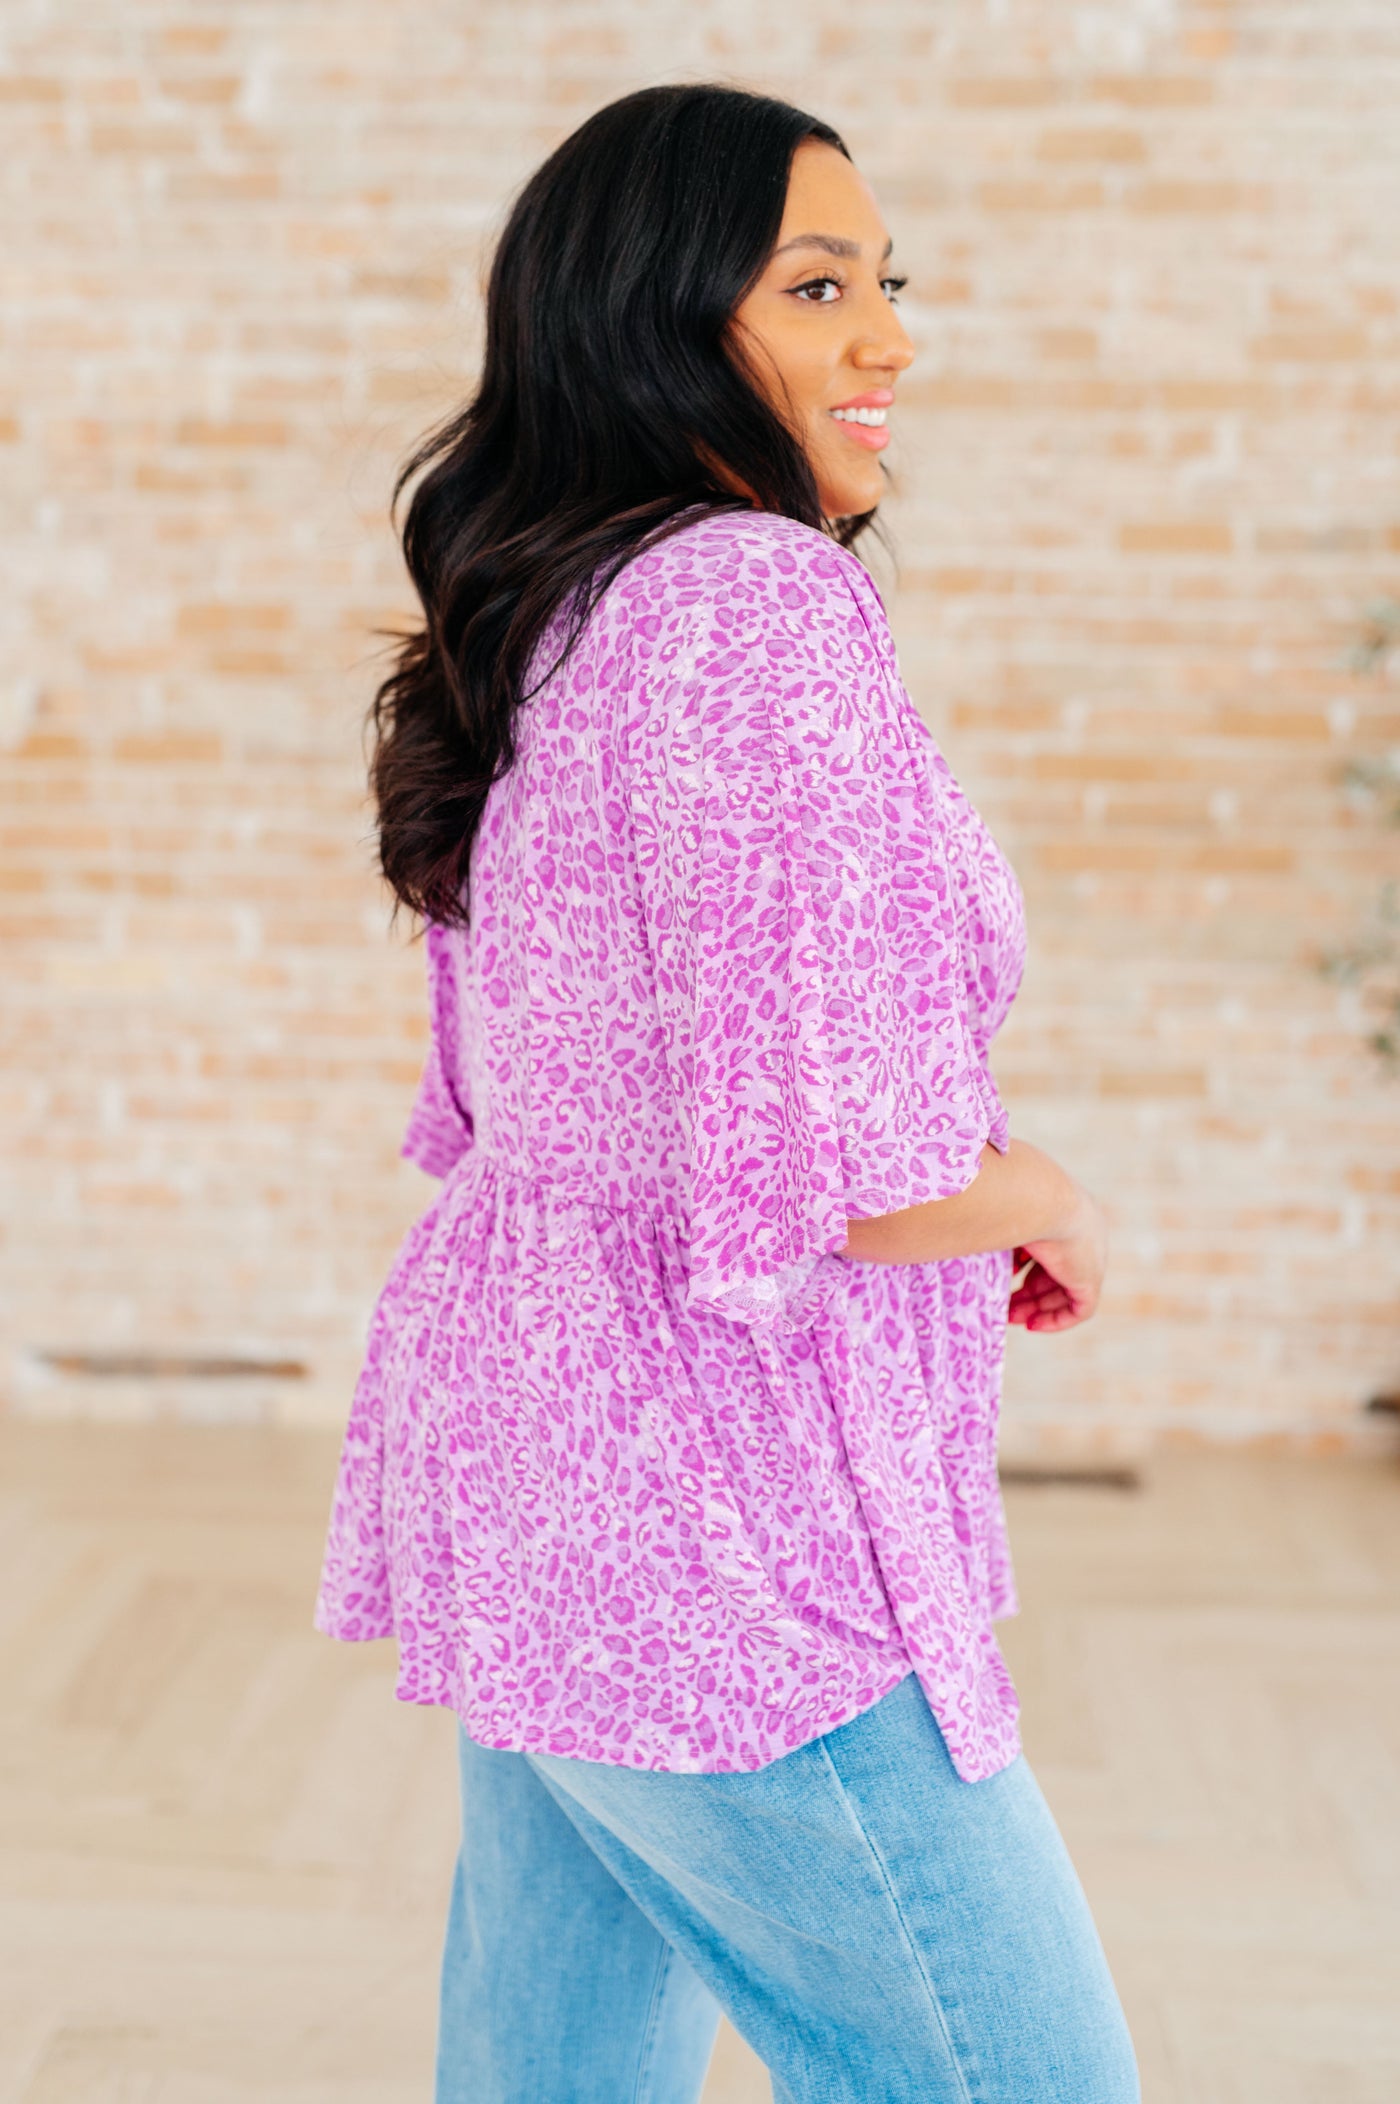 Dreamer Peplum Top in Lavender Leopard Southern Soul Collectives